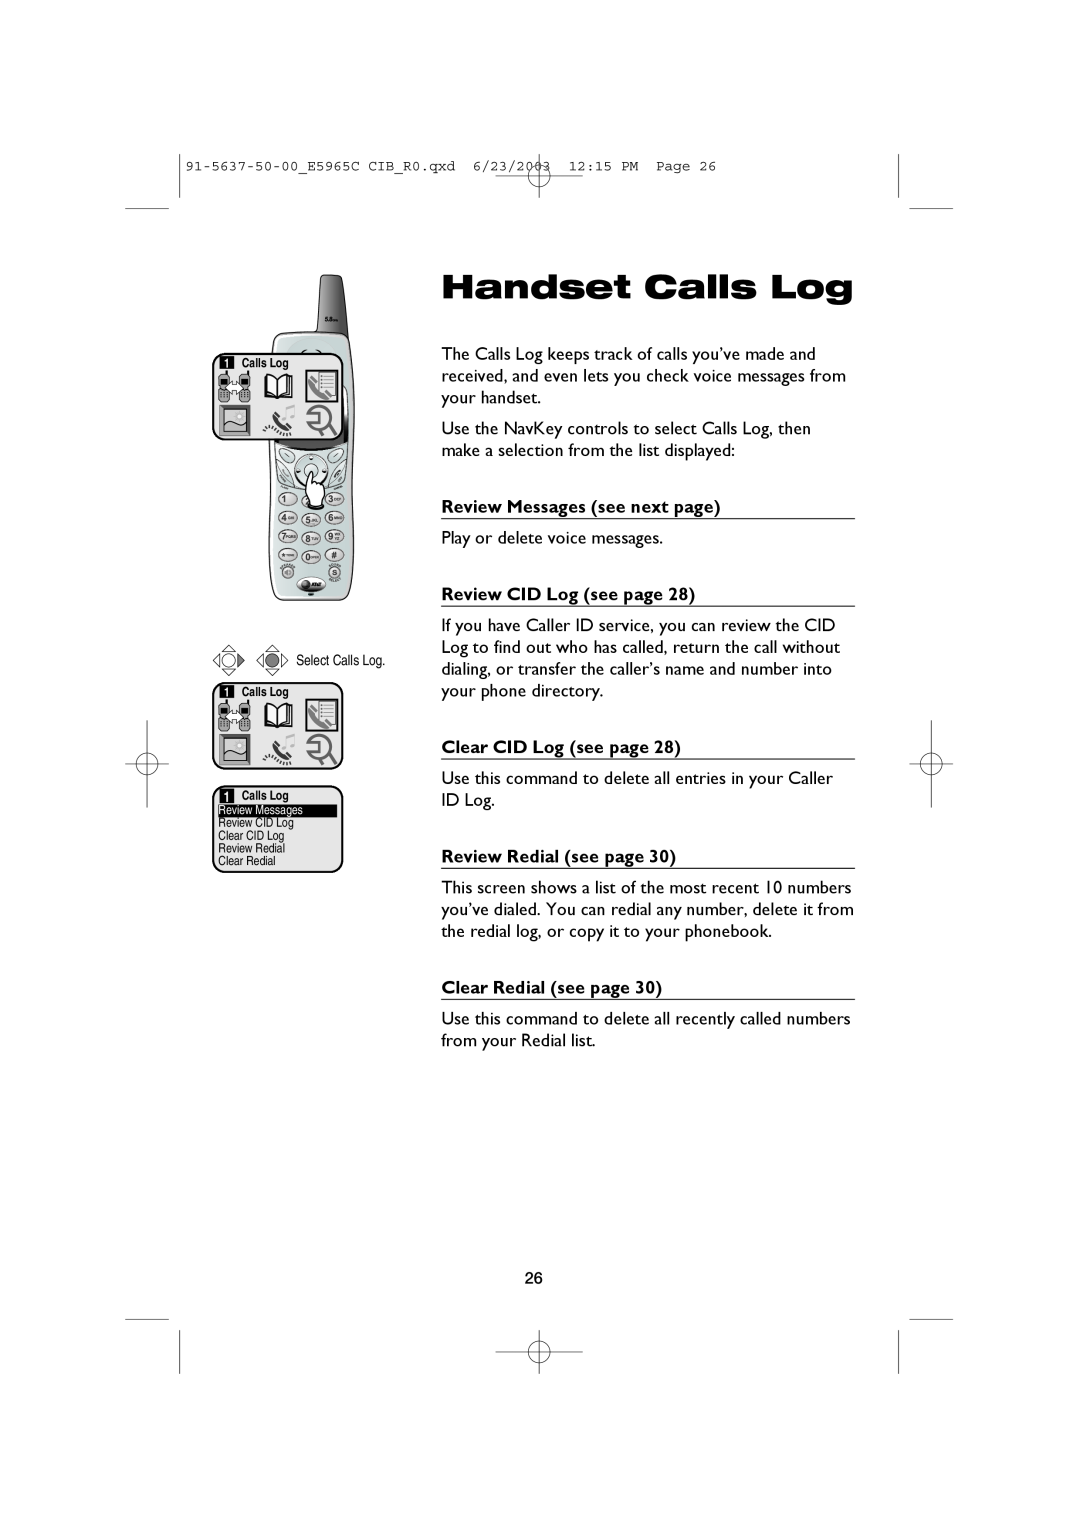 AT&T AT&T E5965C Handset Calls Log, Review Messages see next page, Review CID Log see page, Clear CID Log see page 